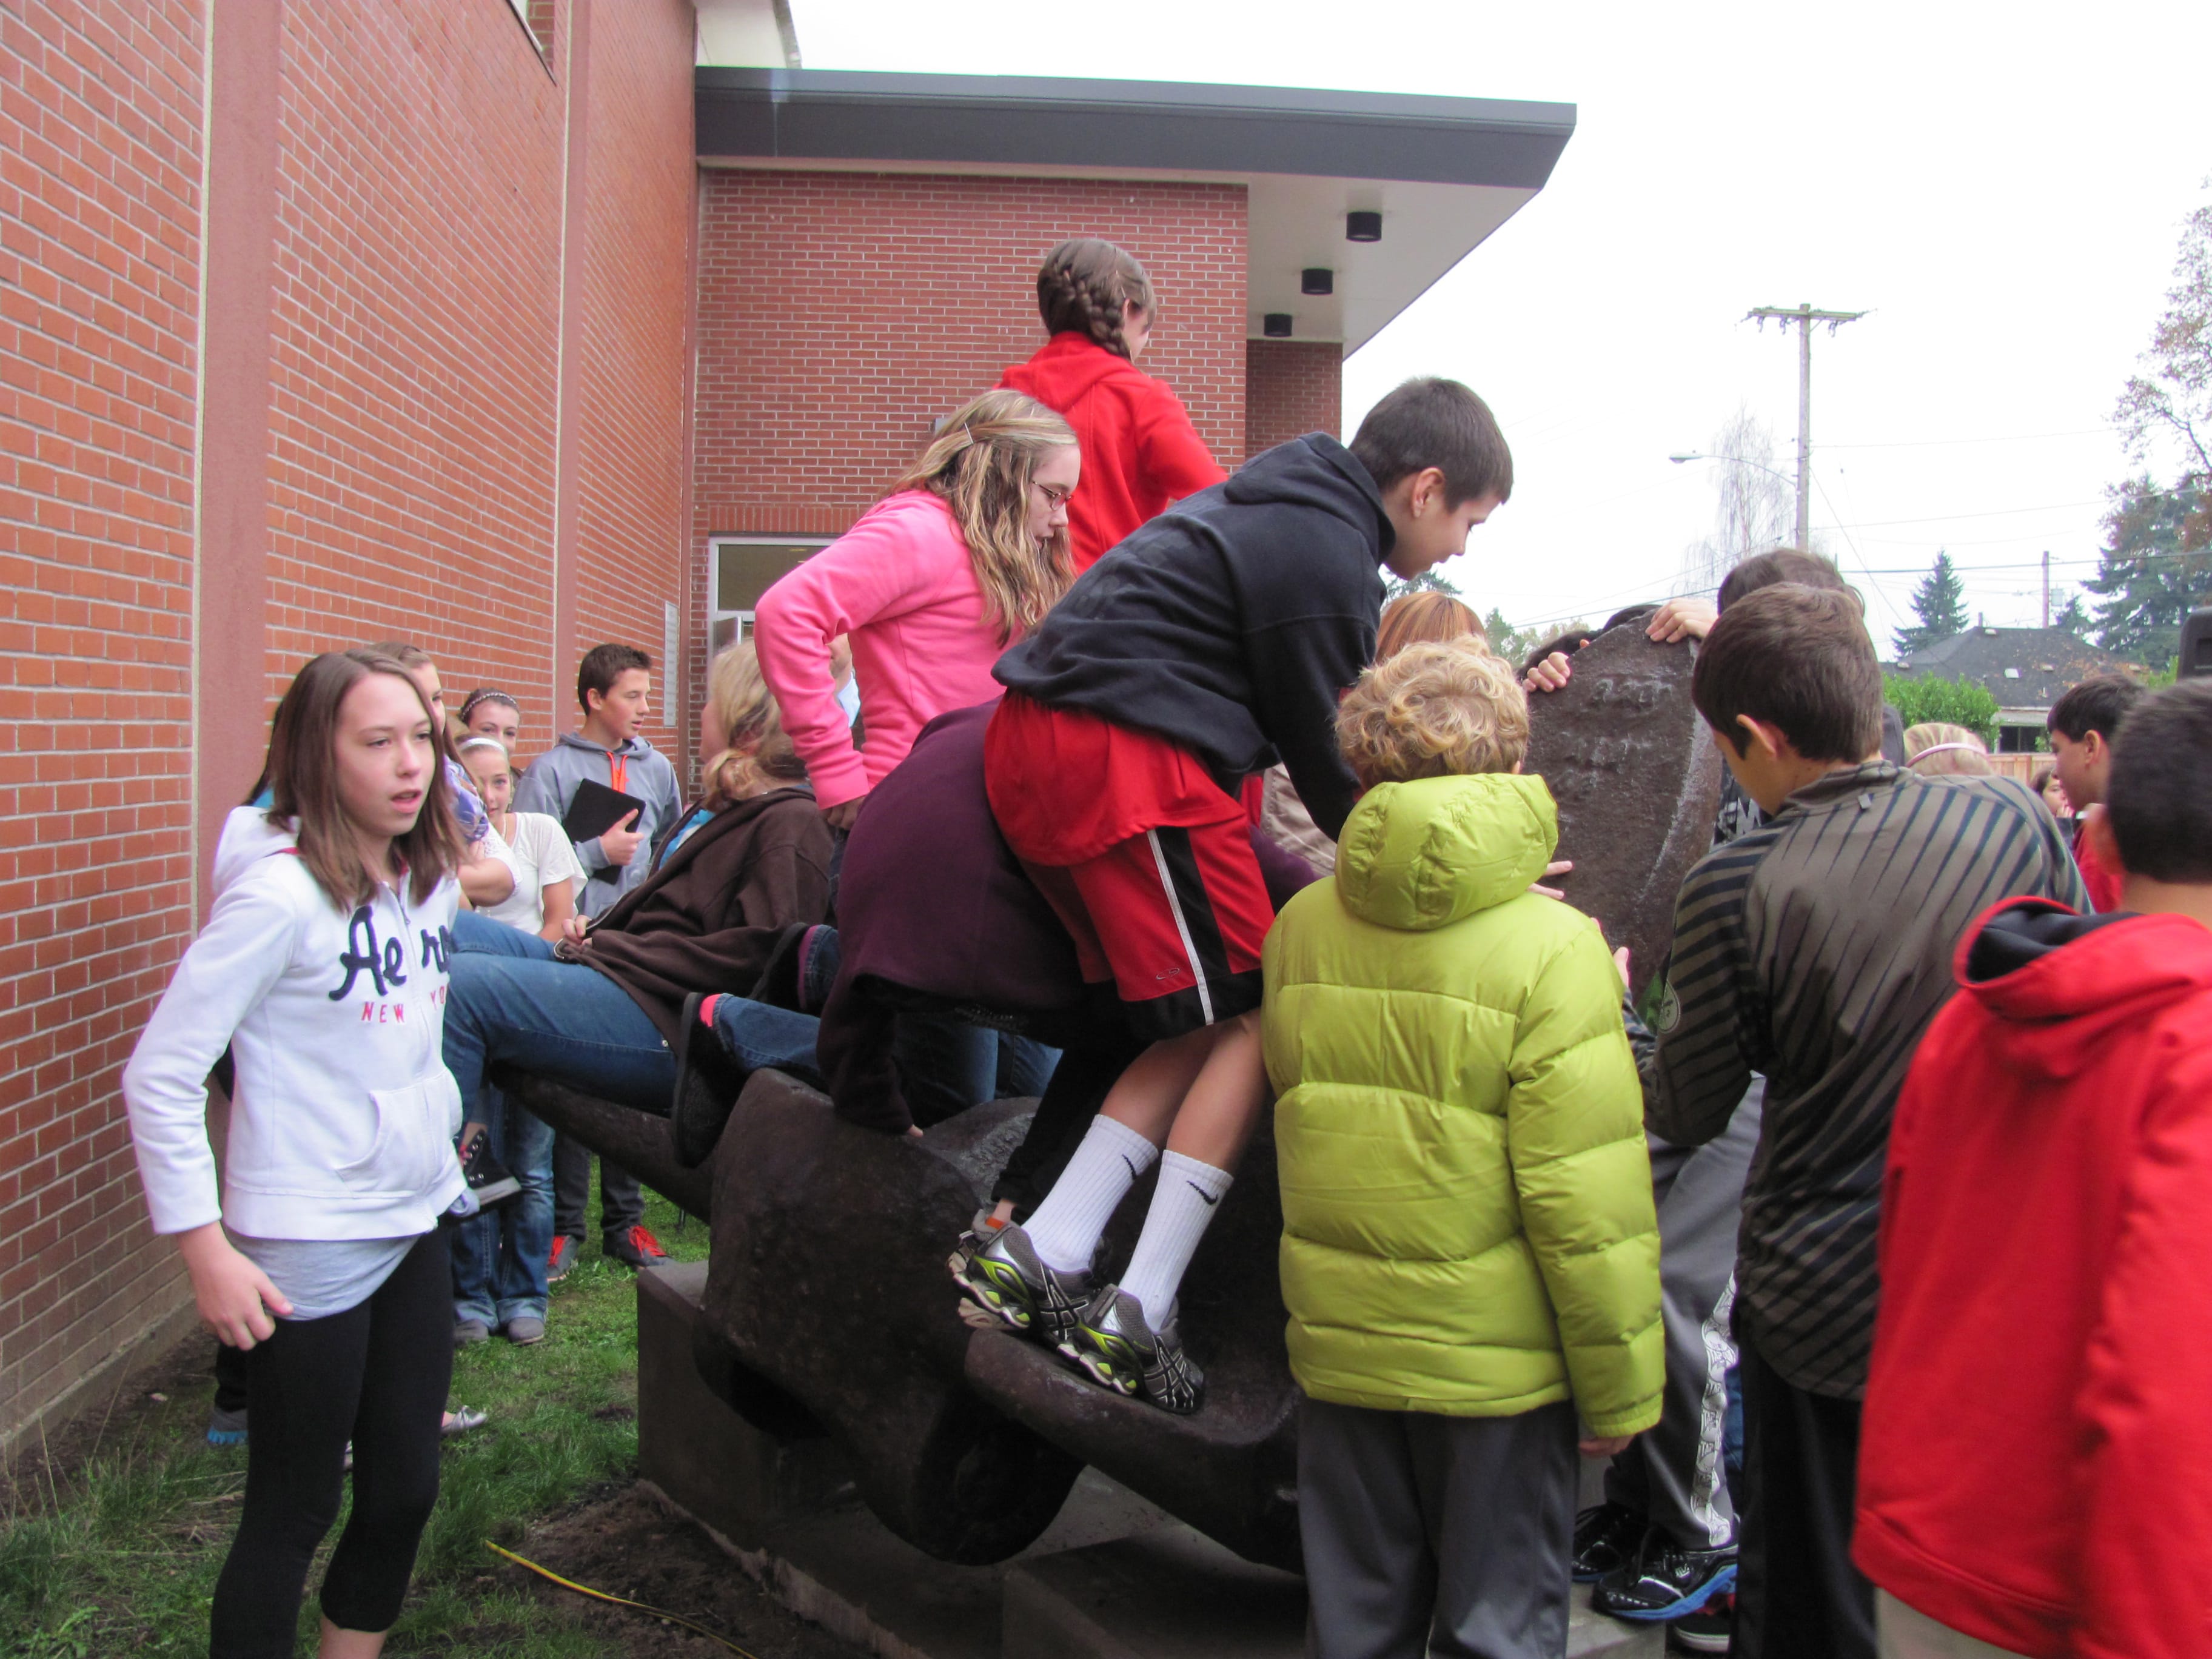 Liberty Middle School students climb on the anchor which was once a part of the SS Davy Crockett, a World War II Liberty ship. &quot;It's a community art piece,&quot; principal Marilyn Boerke said.